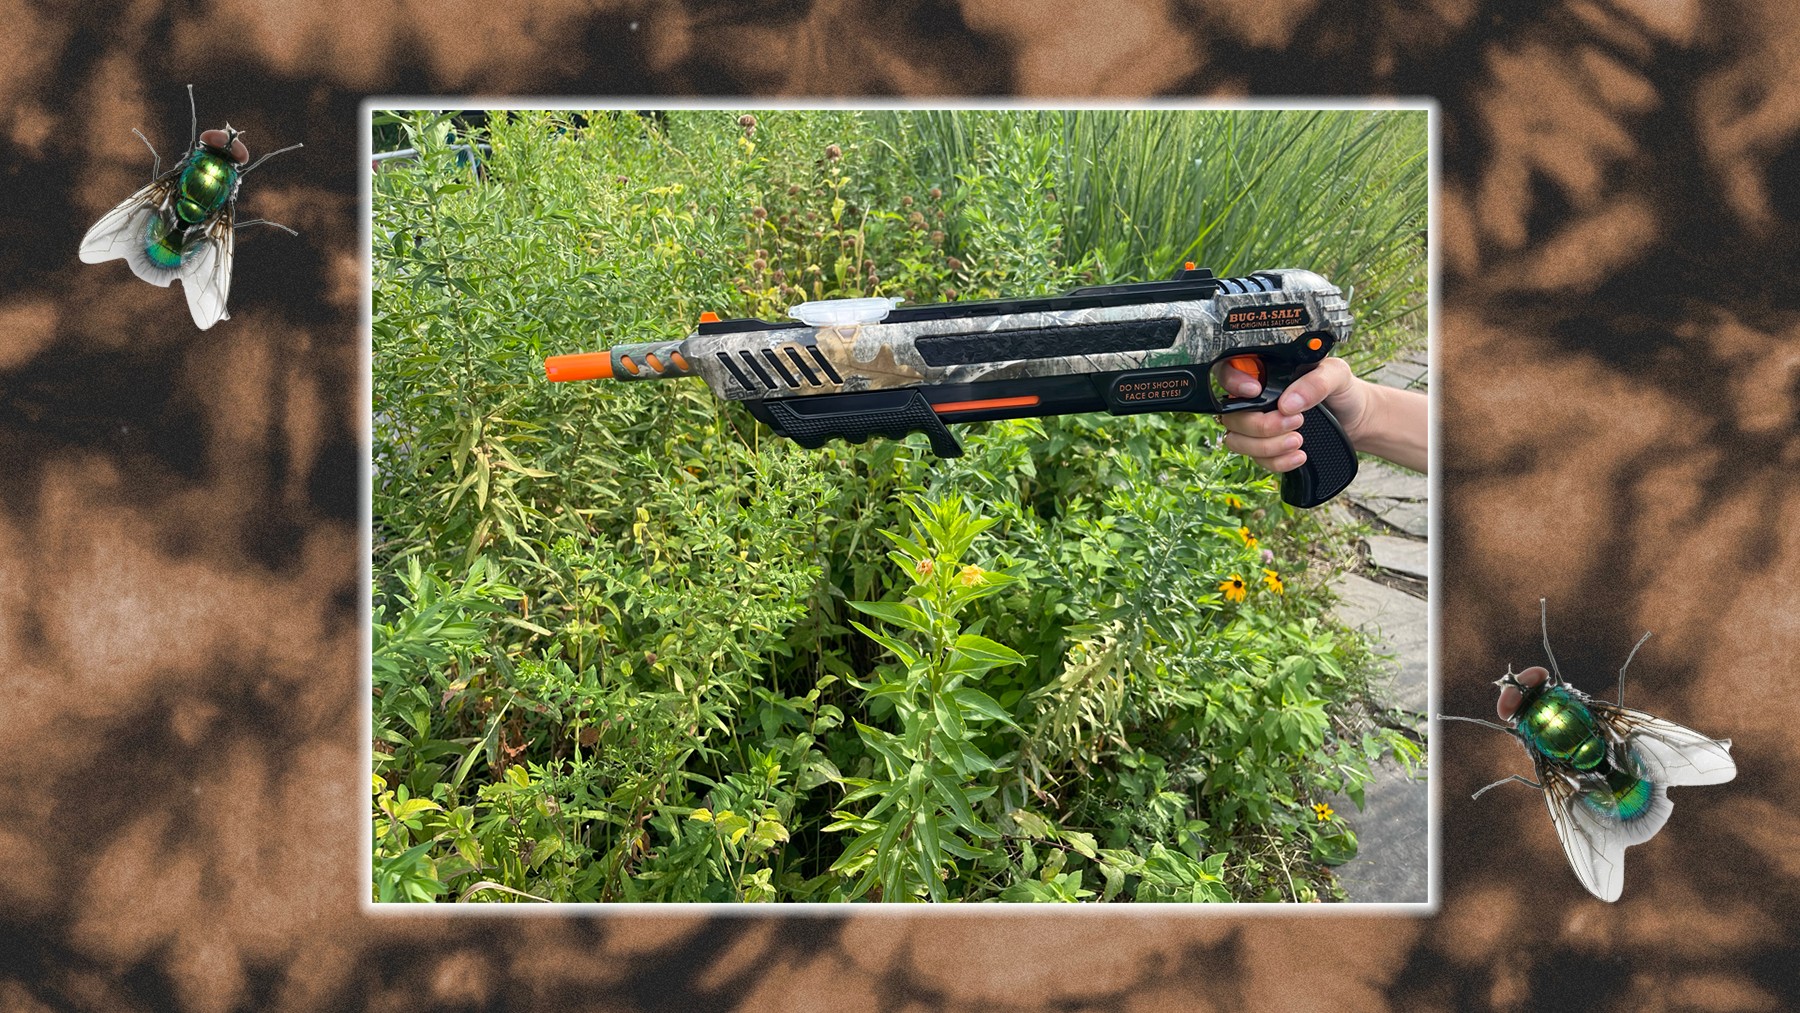 Review: I Tried the Bug-A-Salt Gun to See If It Really Can Kill